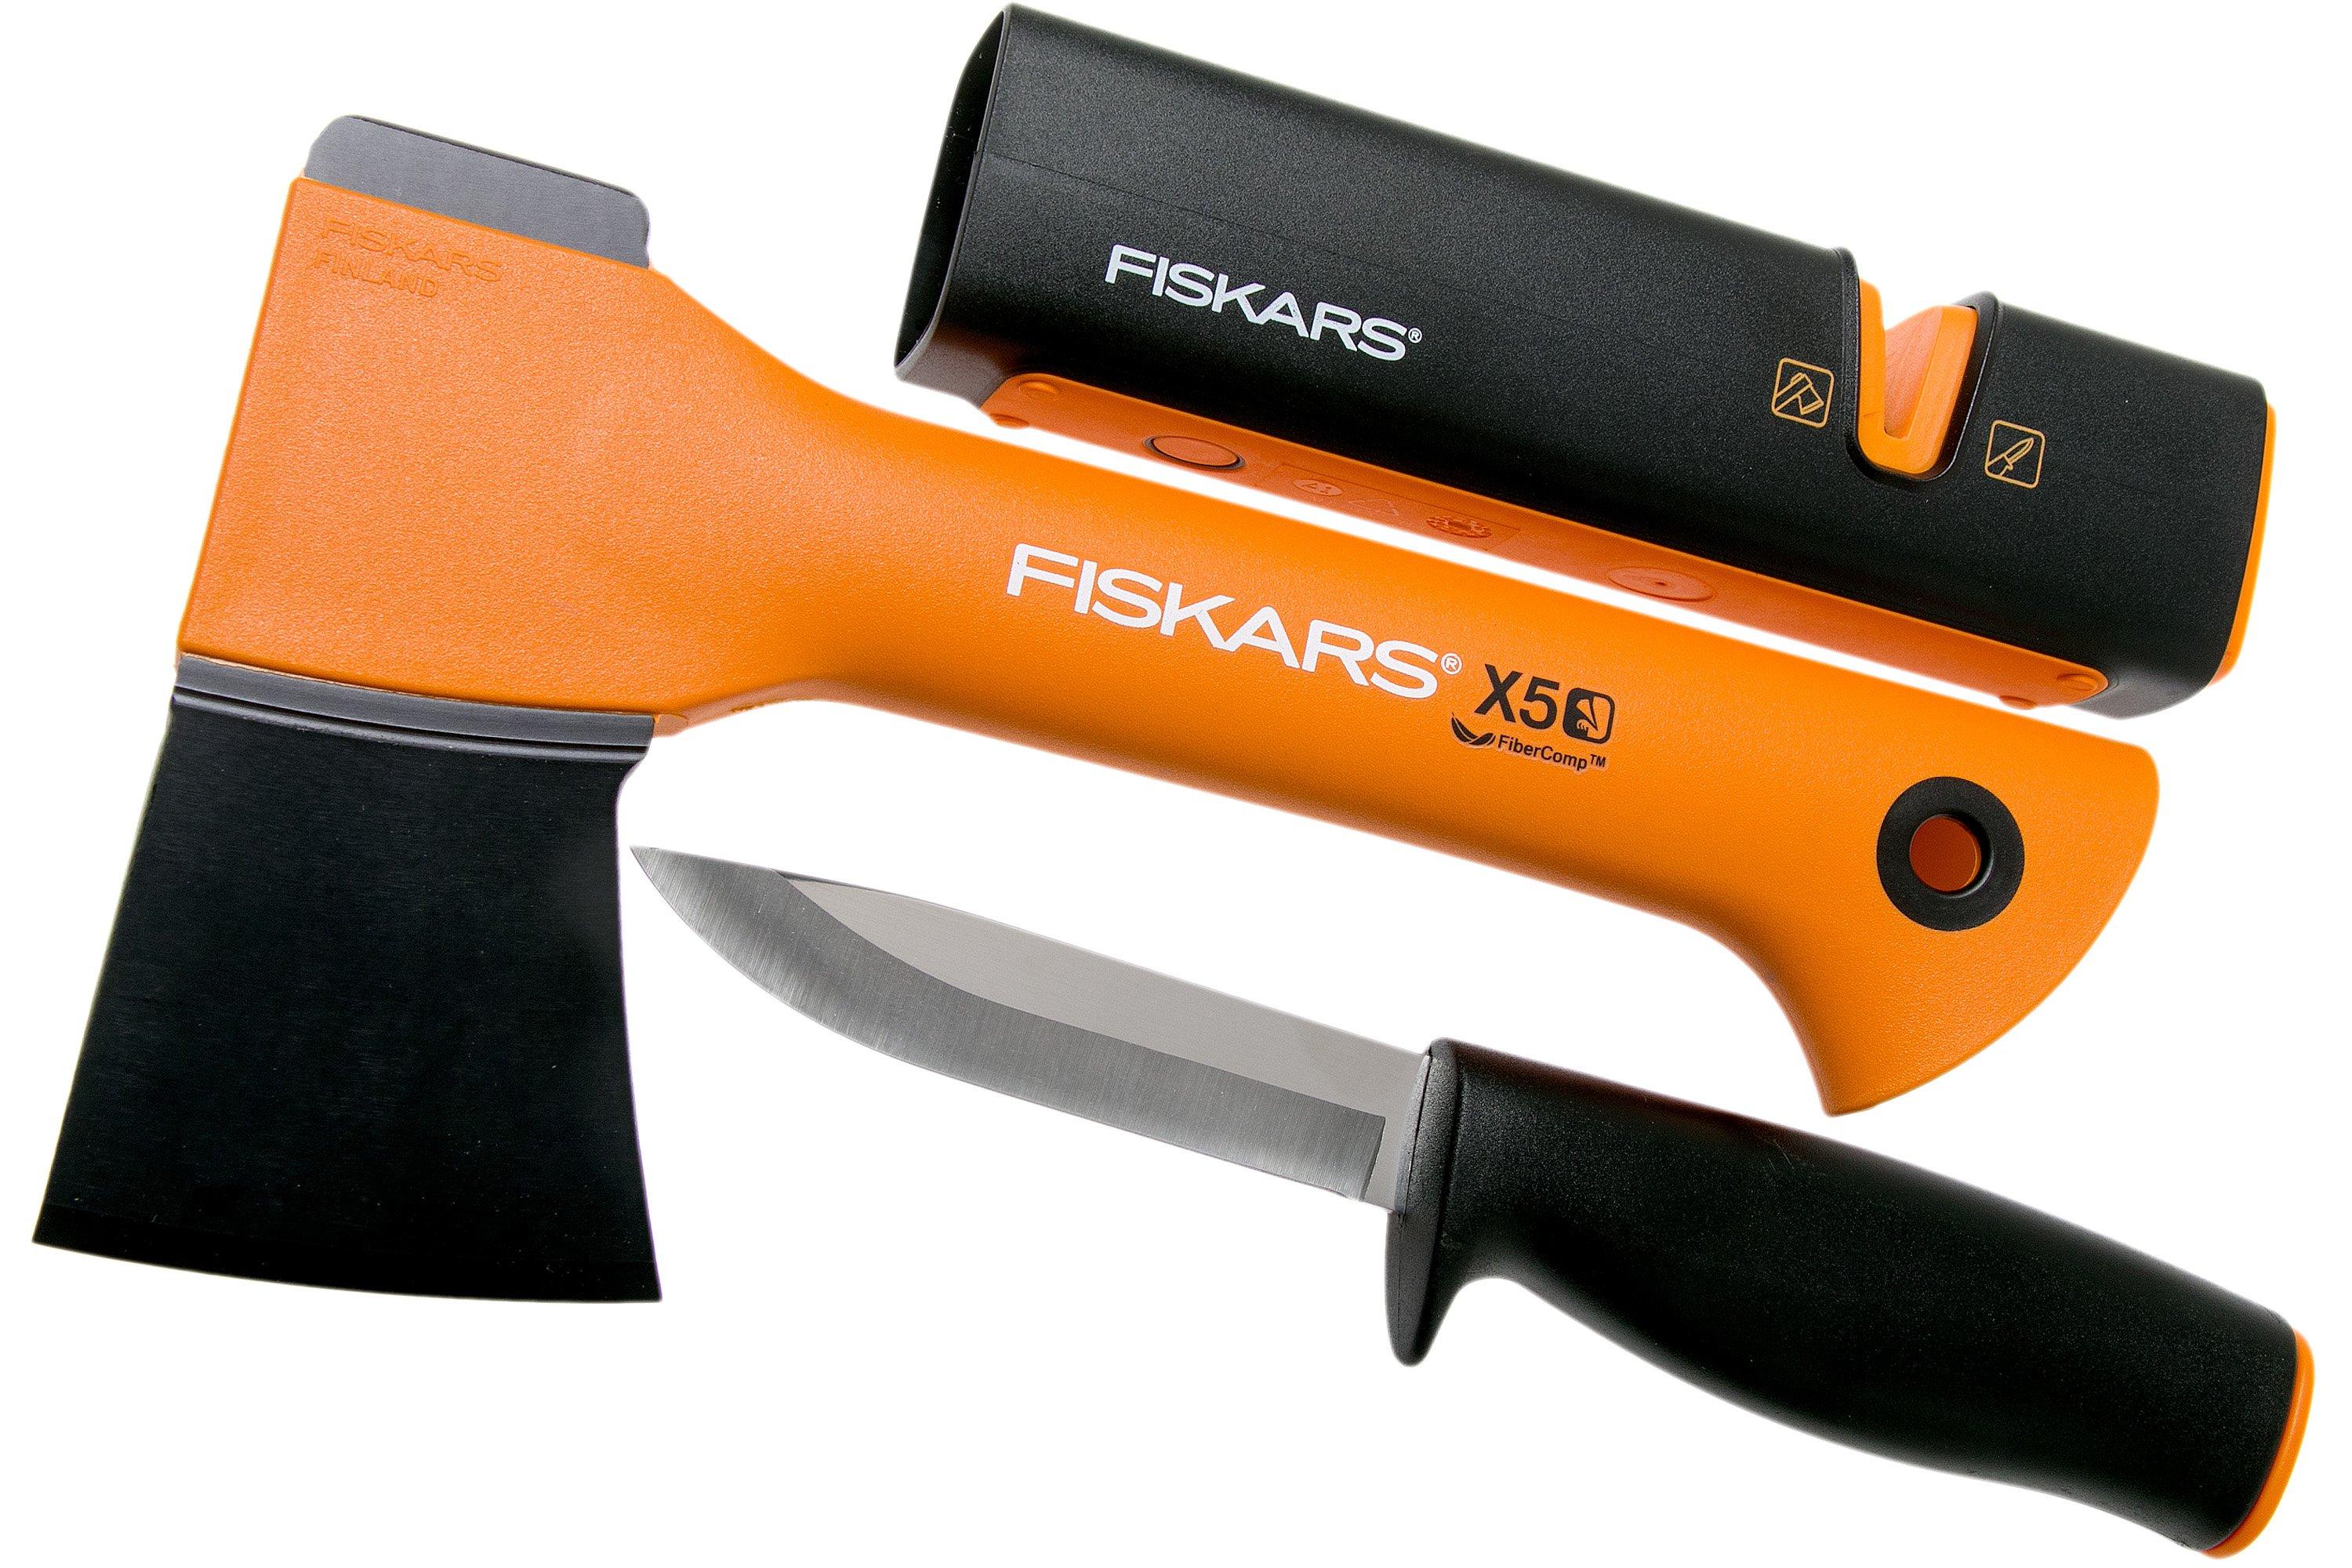 Fiskars X5 Fireplace Set With Axe Knife And Sharpener Advantageously